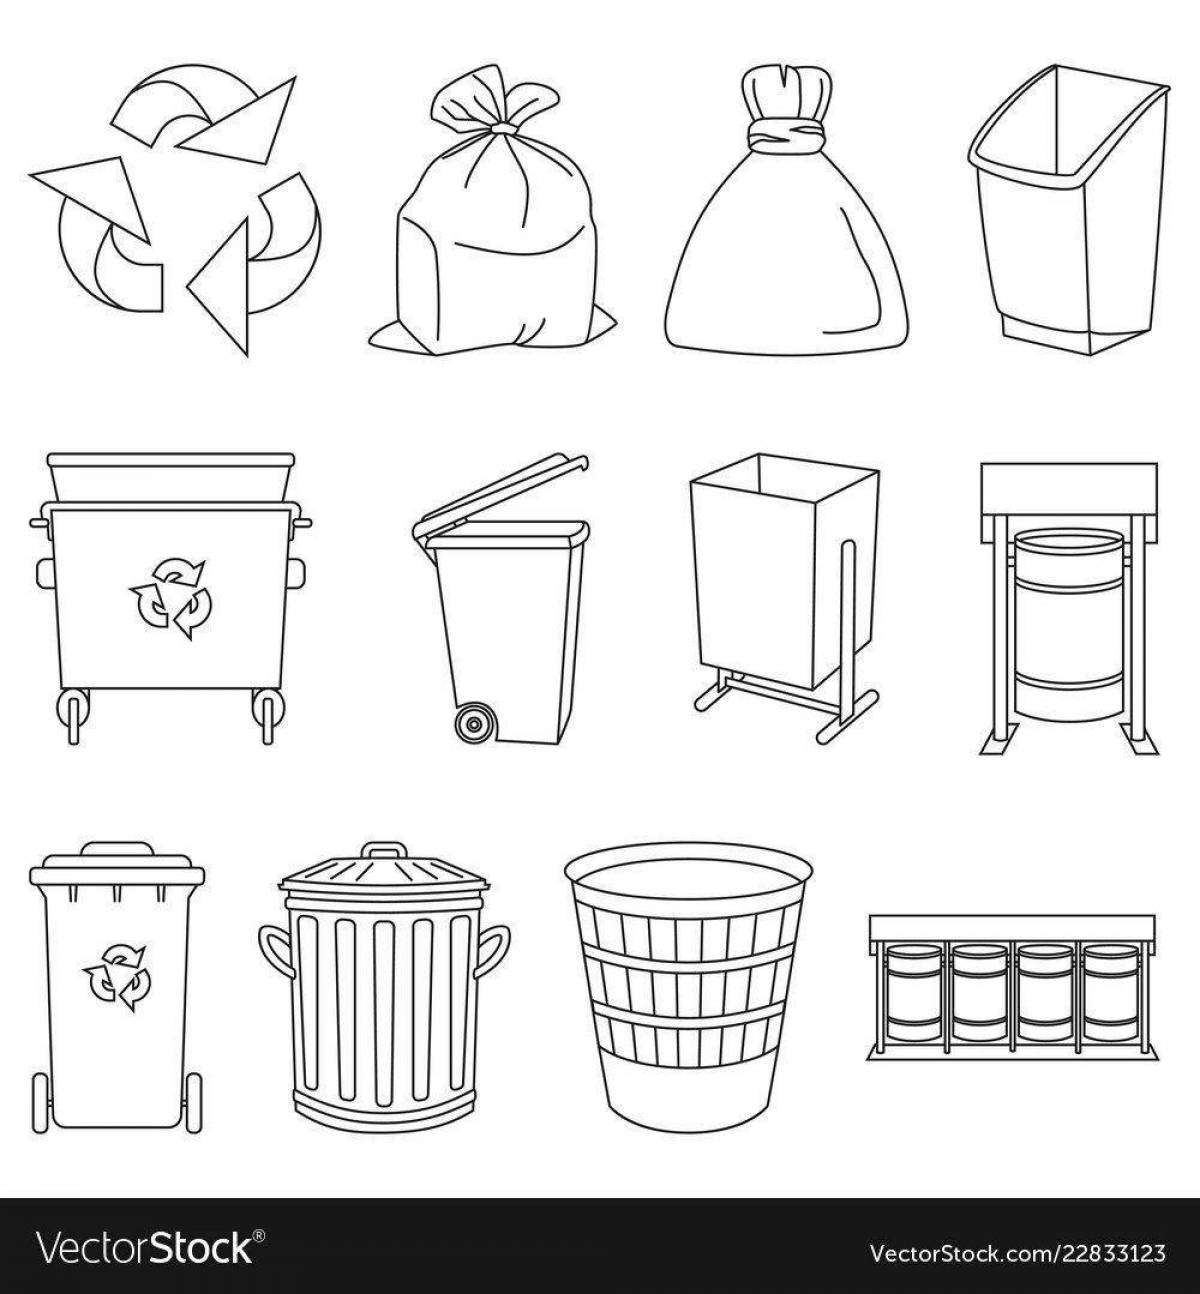 Mysterious trash can coloring page